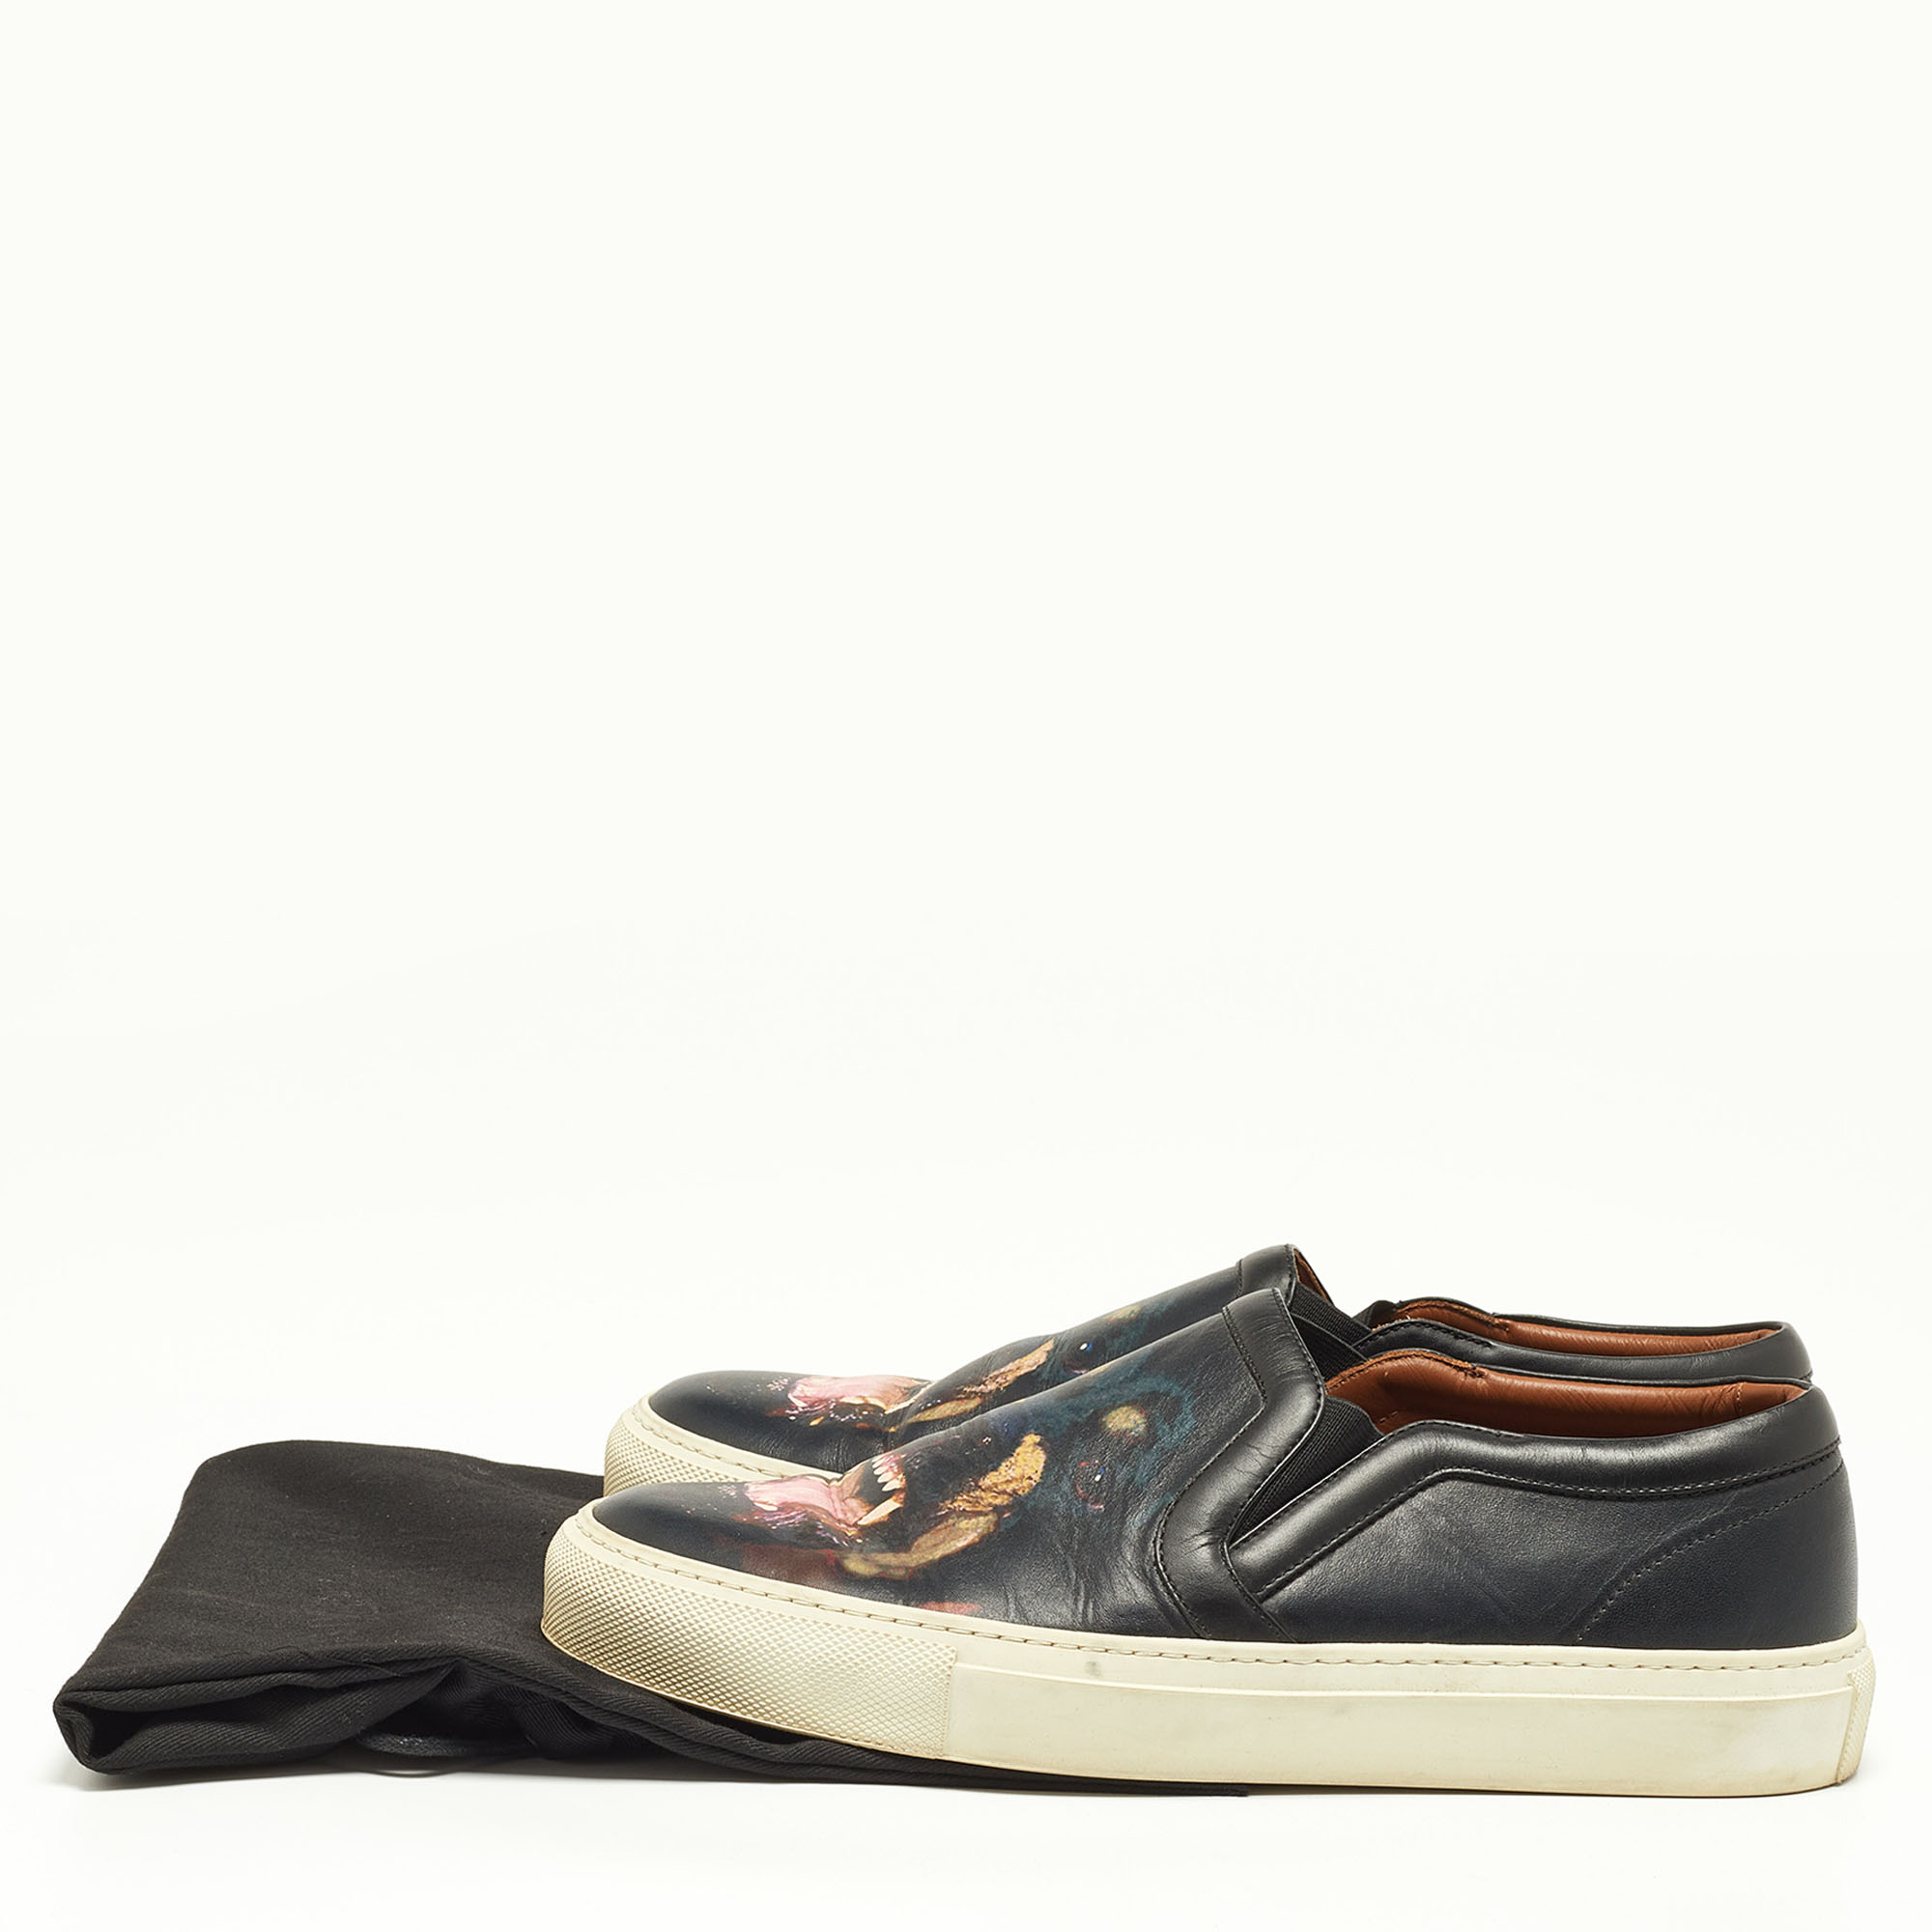 Givenchy Black Leather Rottweiler Slip On Sneakers Size 39